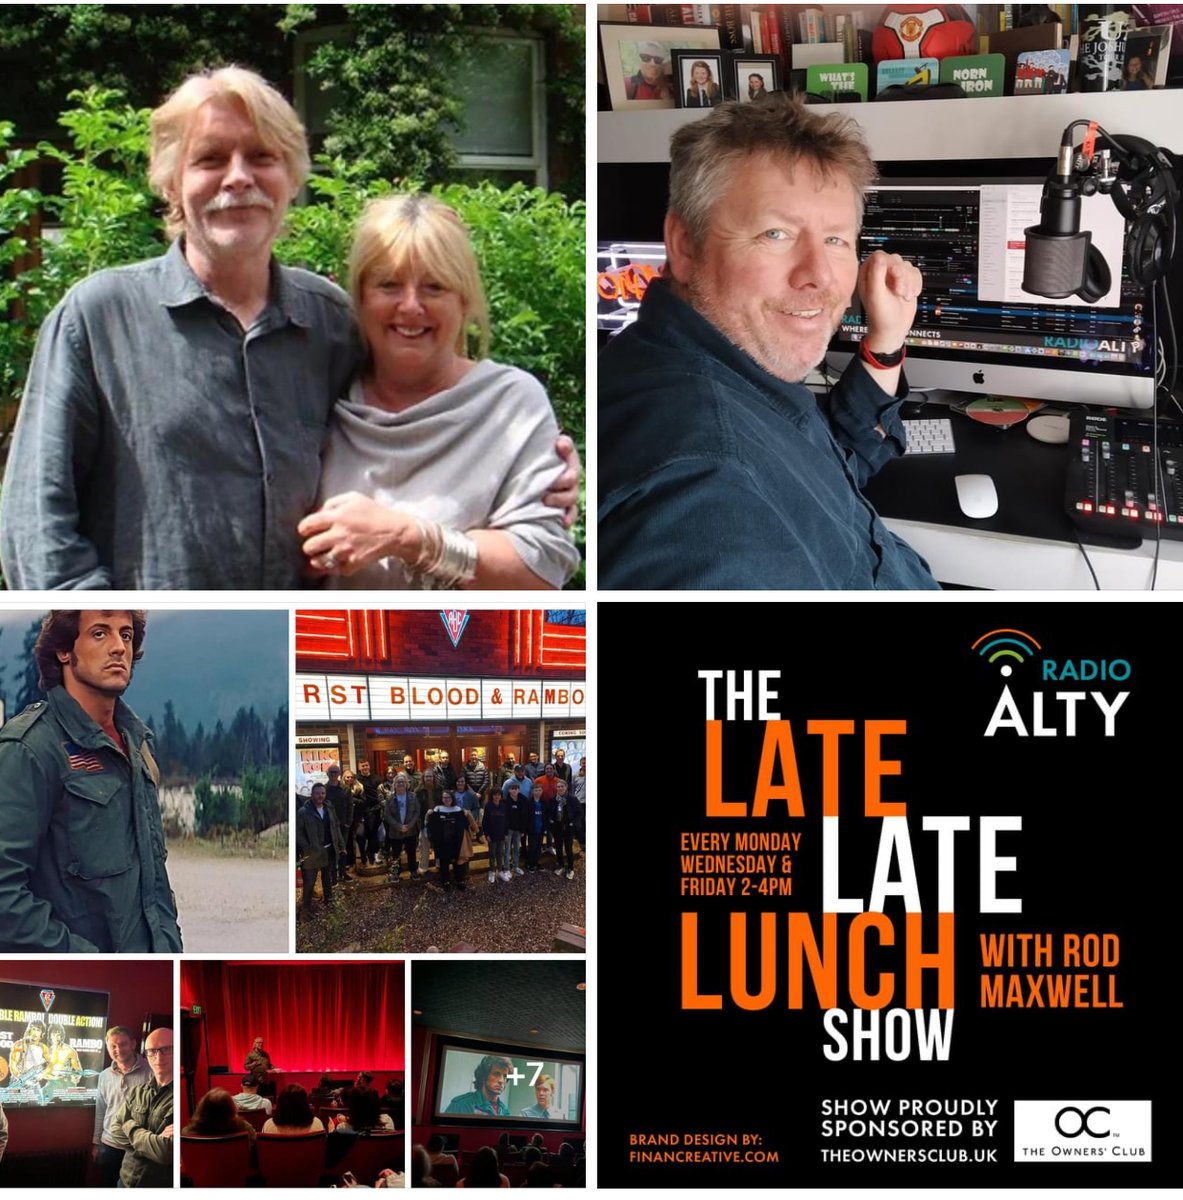 Live from 2pm #theLateLateLunchshow talking childcare nurseries with #backtothegardenchildcare founders Jeannie & Stewart; gig review of #EchoandtheBunnymen; retro #Rambo movie double review & Emily live on air with news & views. Live from 2 on RadioAlty.co.uk #Alty